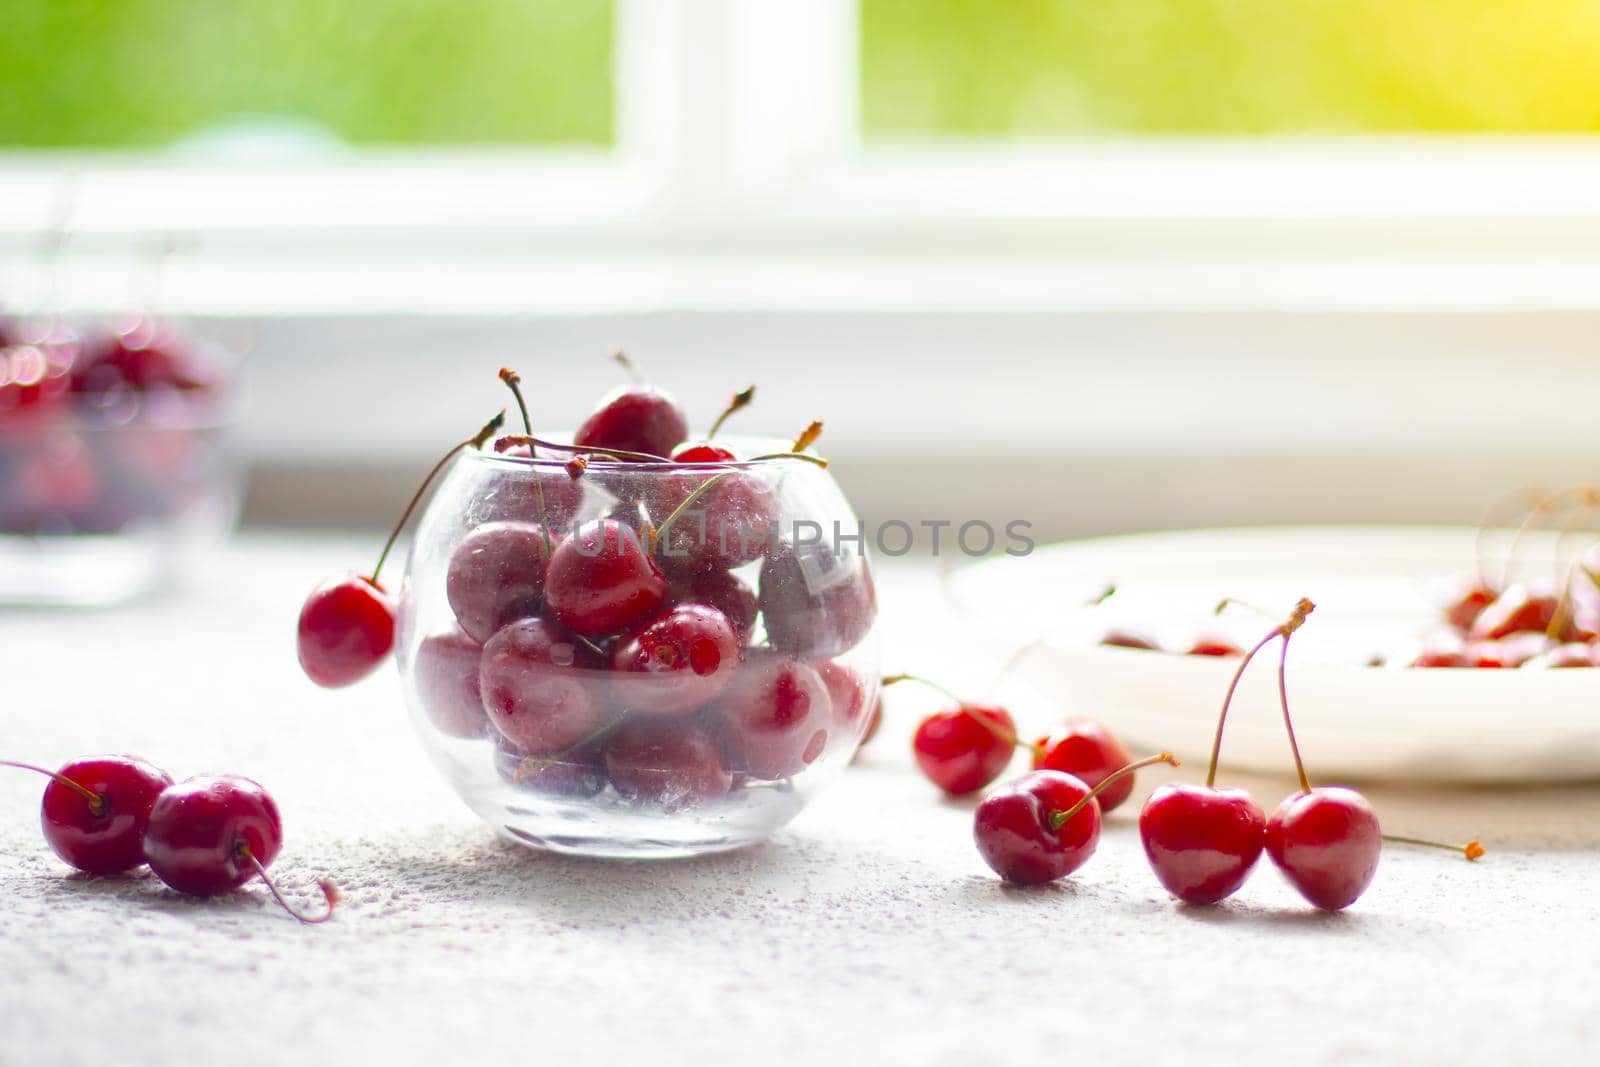 Cherry berry in a vase. Cherry berry in a transparent plate on a light background . Summer red berries. Article about berries.